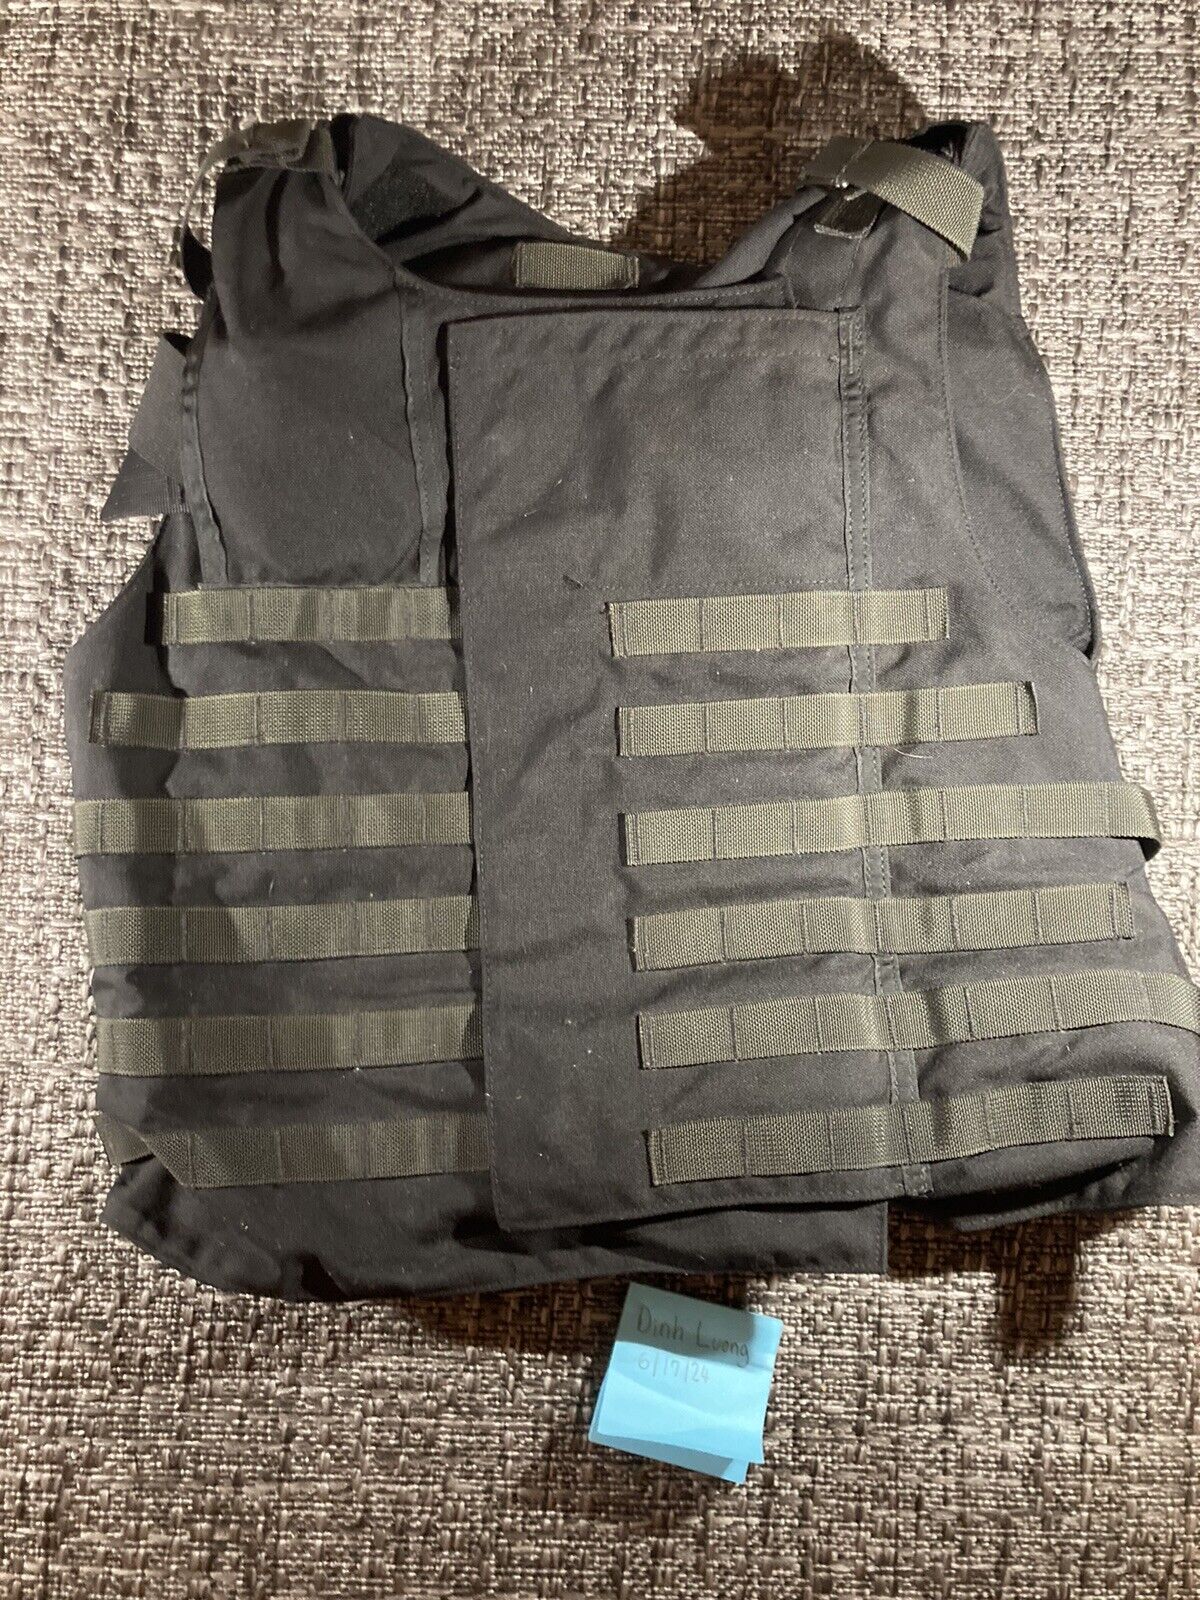 MSA Paraclete Large ICV 07 Black Cord Quick Release GWOT Point Blank Style Vest